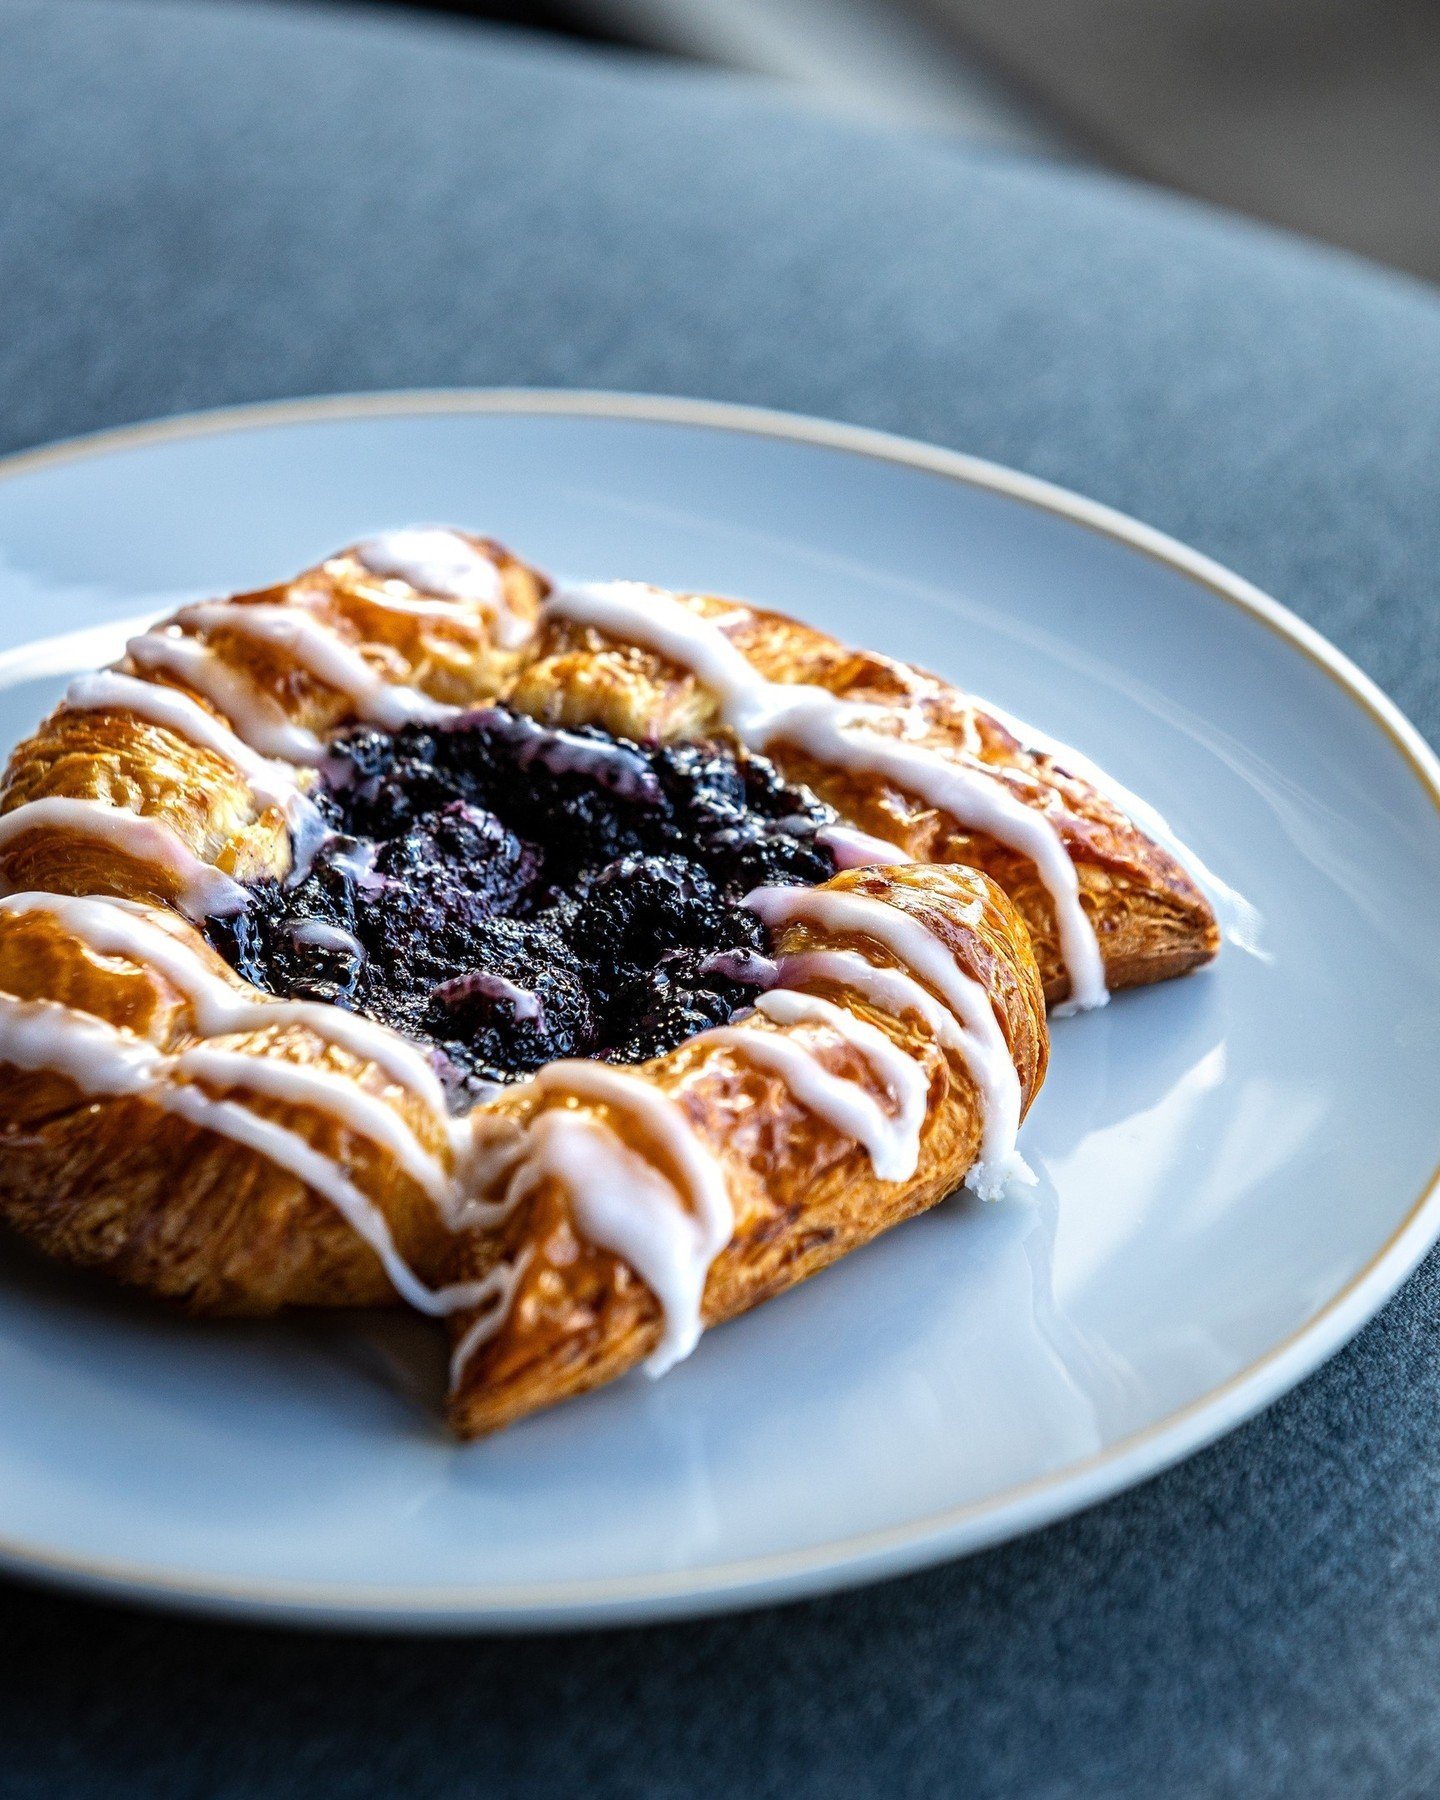 Indulge in a taste of pastry perfection with our Fresh Berry &amp; Cream Cheese Danish ✨ From the buttery layers of pastry to the creamy richness of the Cream Cheese filling and the sweet tang of berries 🫐